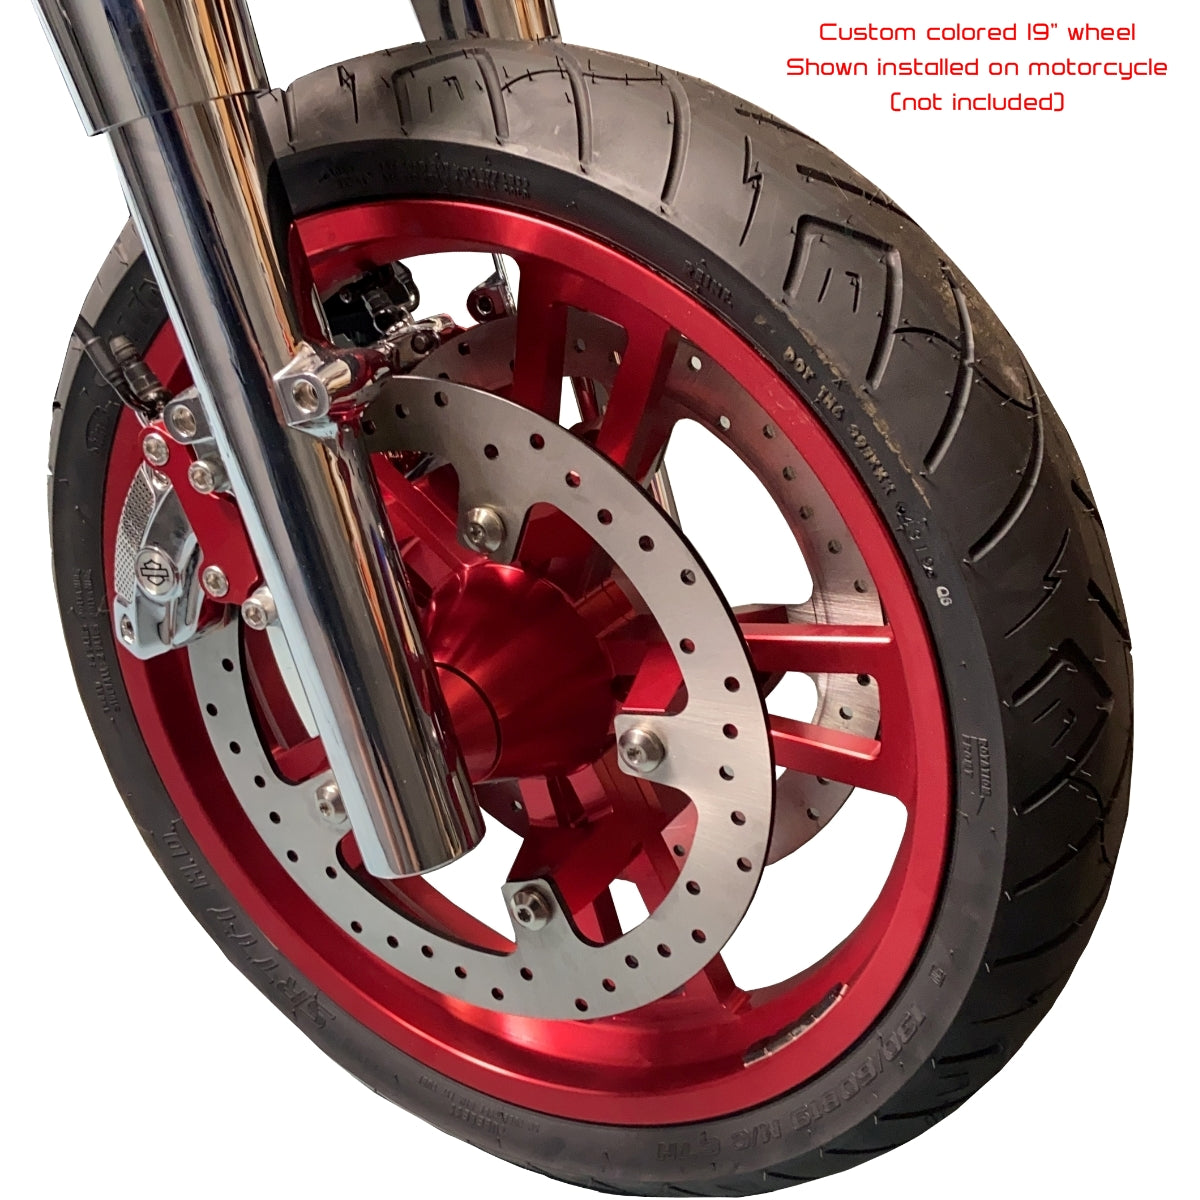 GeezerEngineering custom colored 19" front wheel in red with 14" brake rotors for Harley